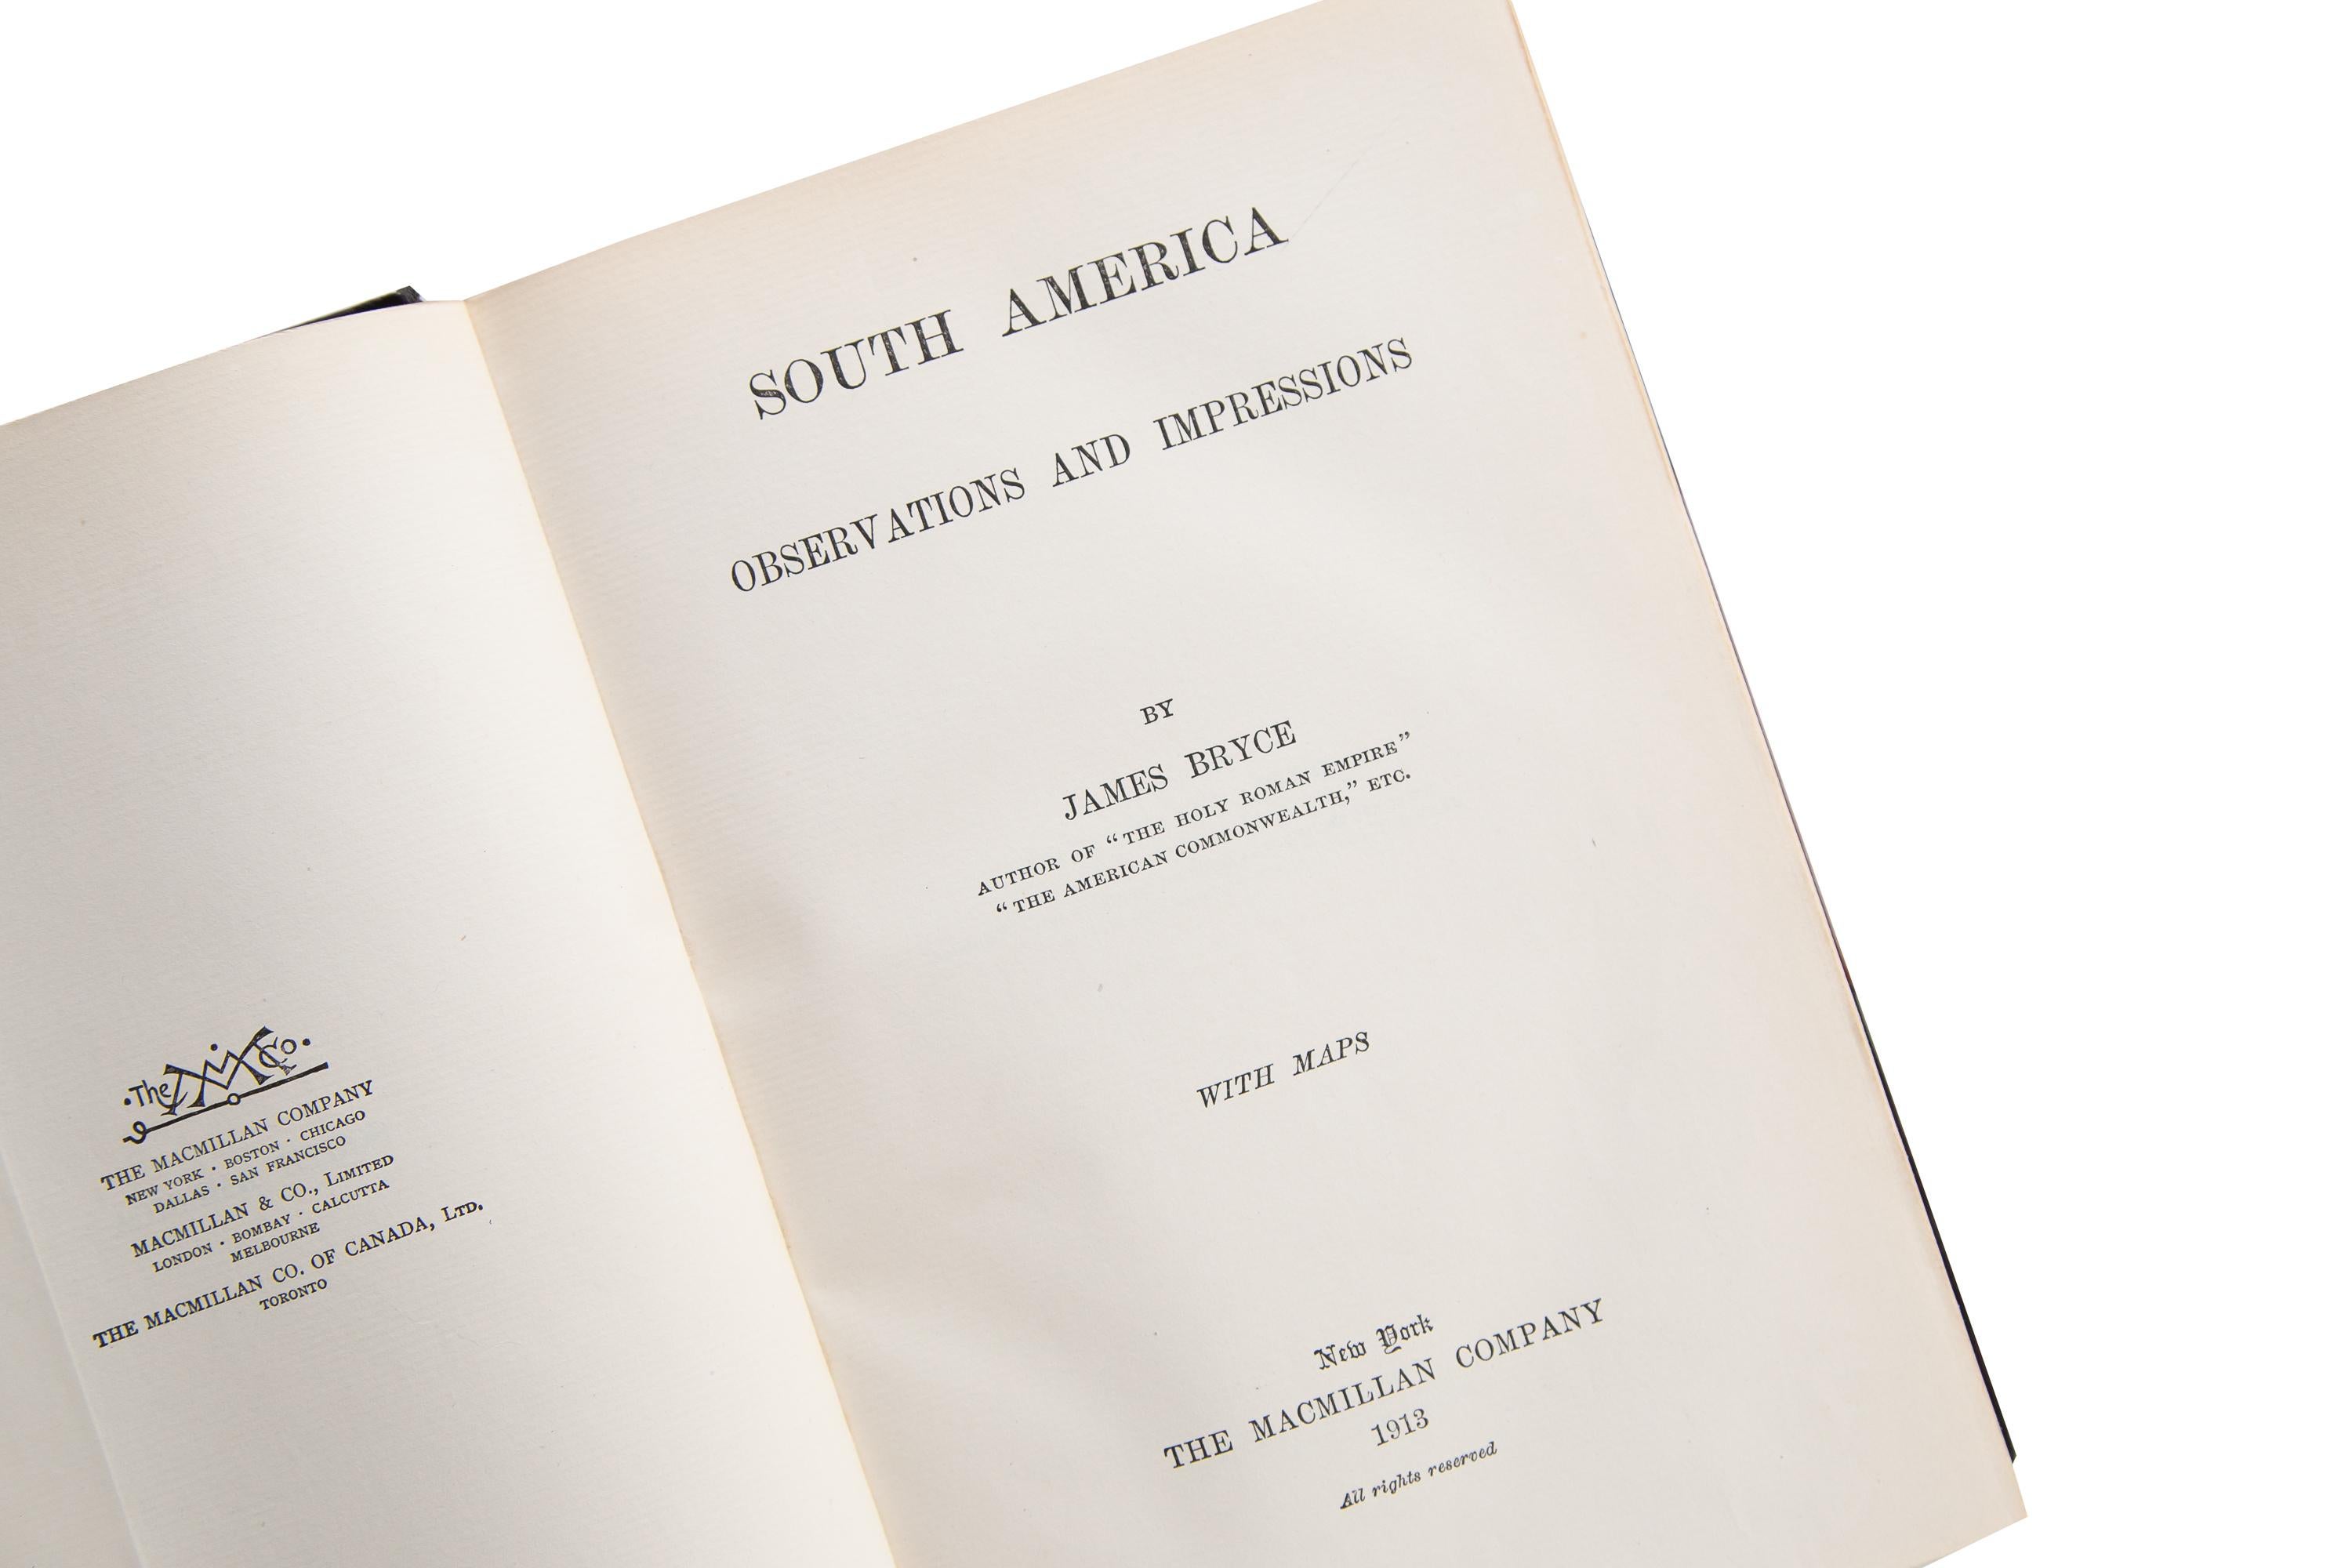 American 1 Volume, James Bryce, South America, Observations & Impressions For Sale